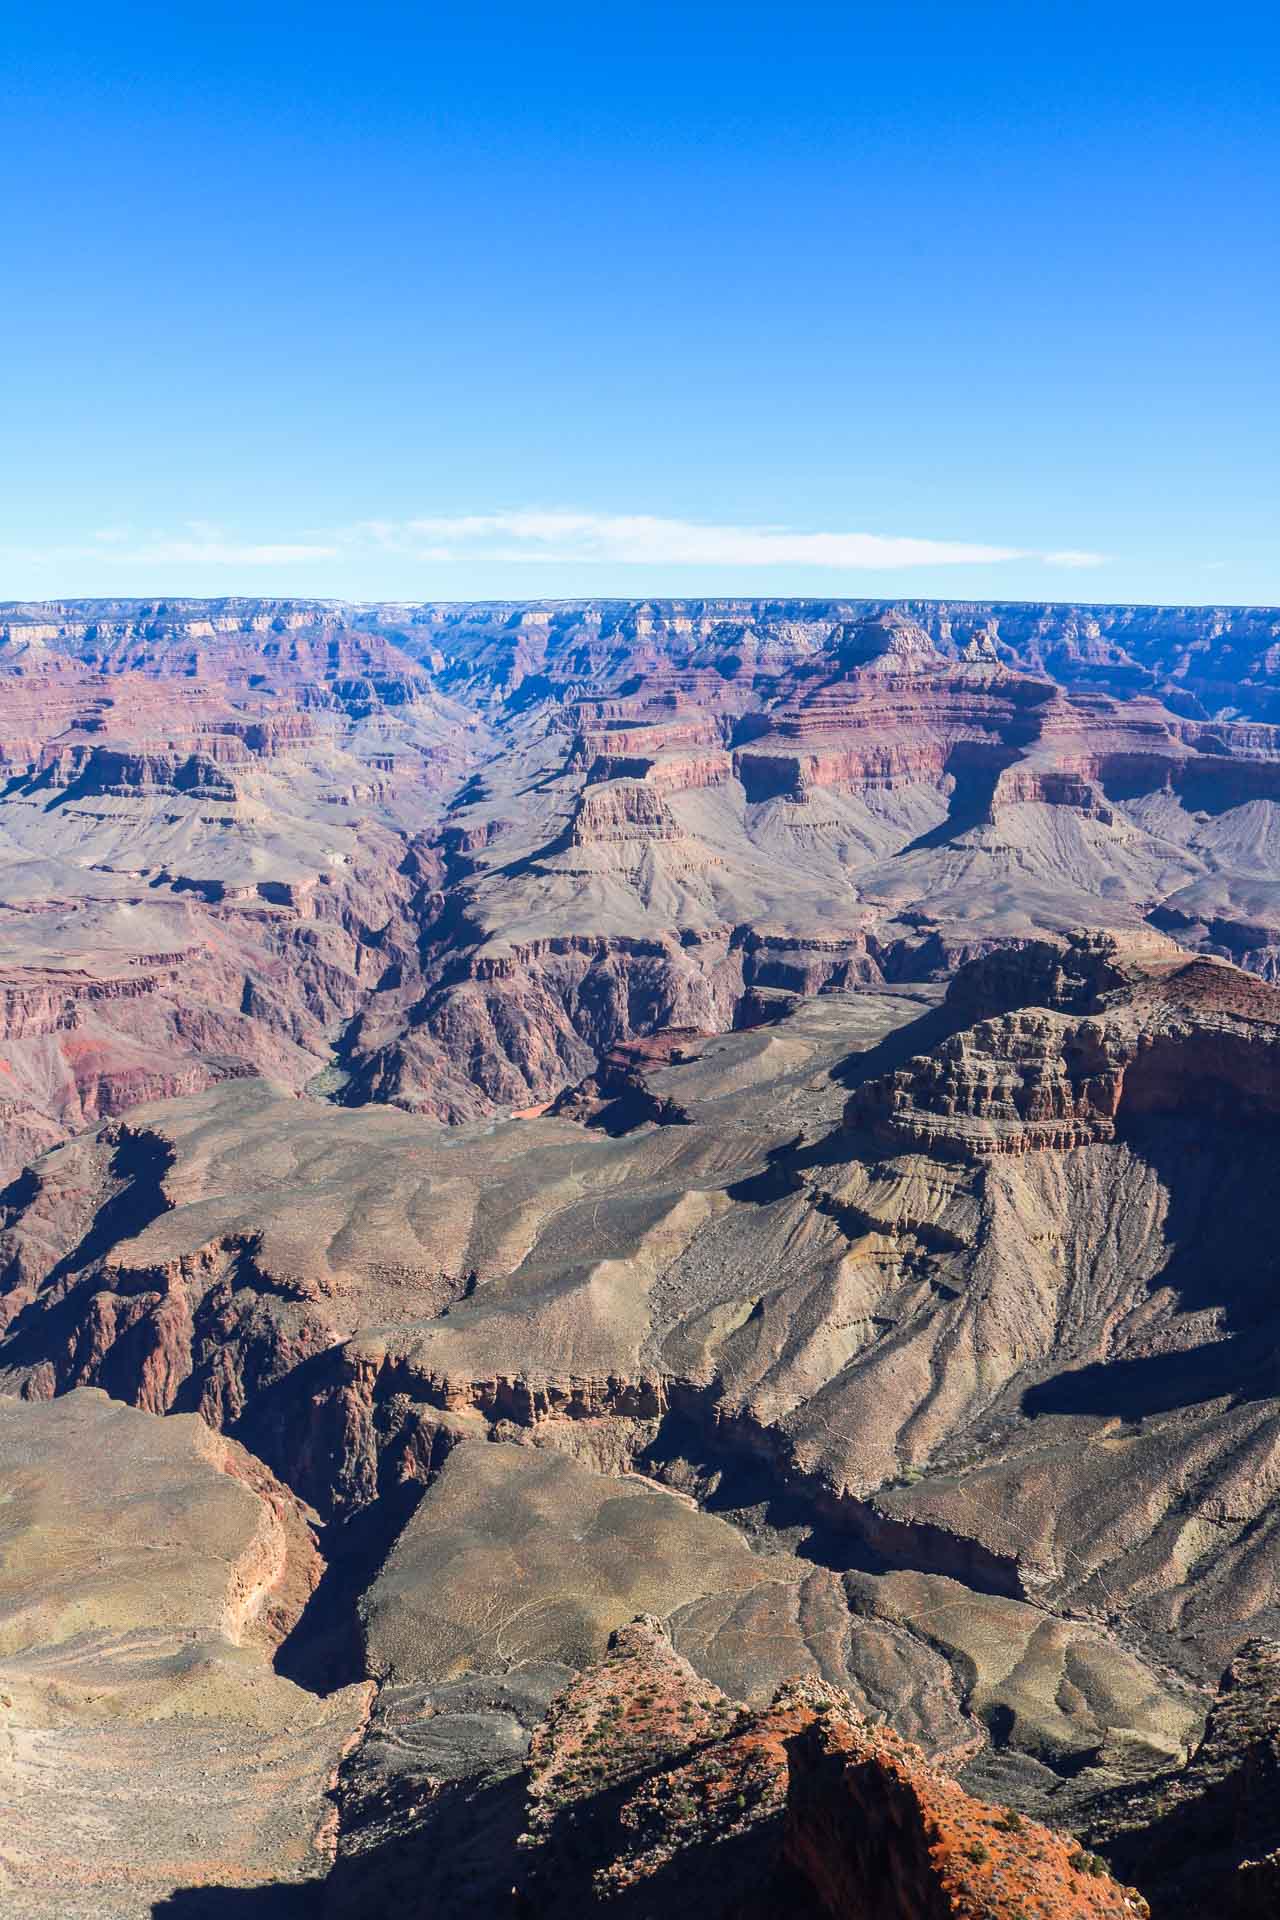 Yavapai Point view of the Grand Canyon landscape